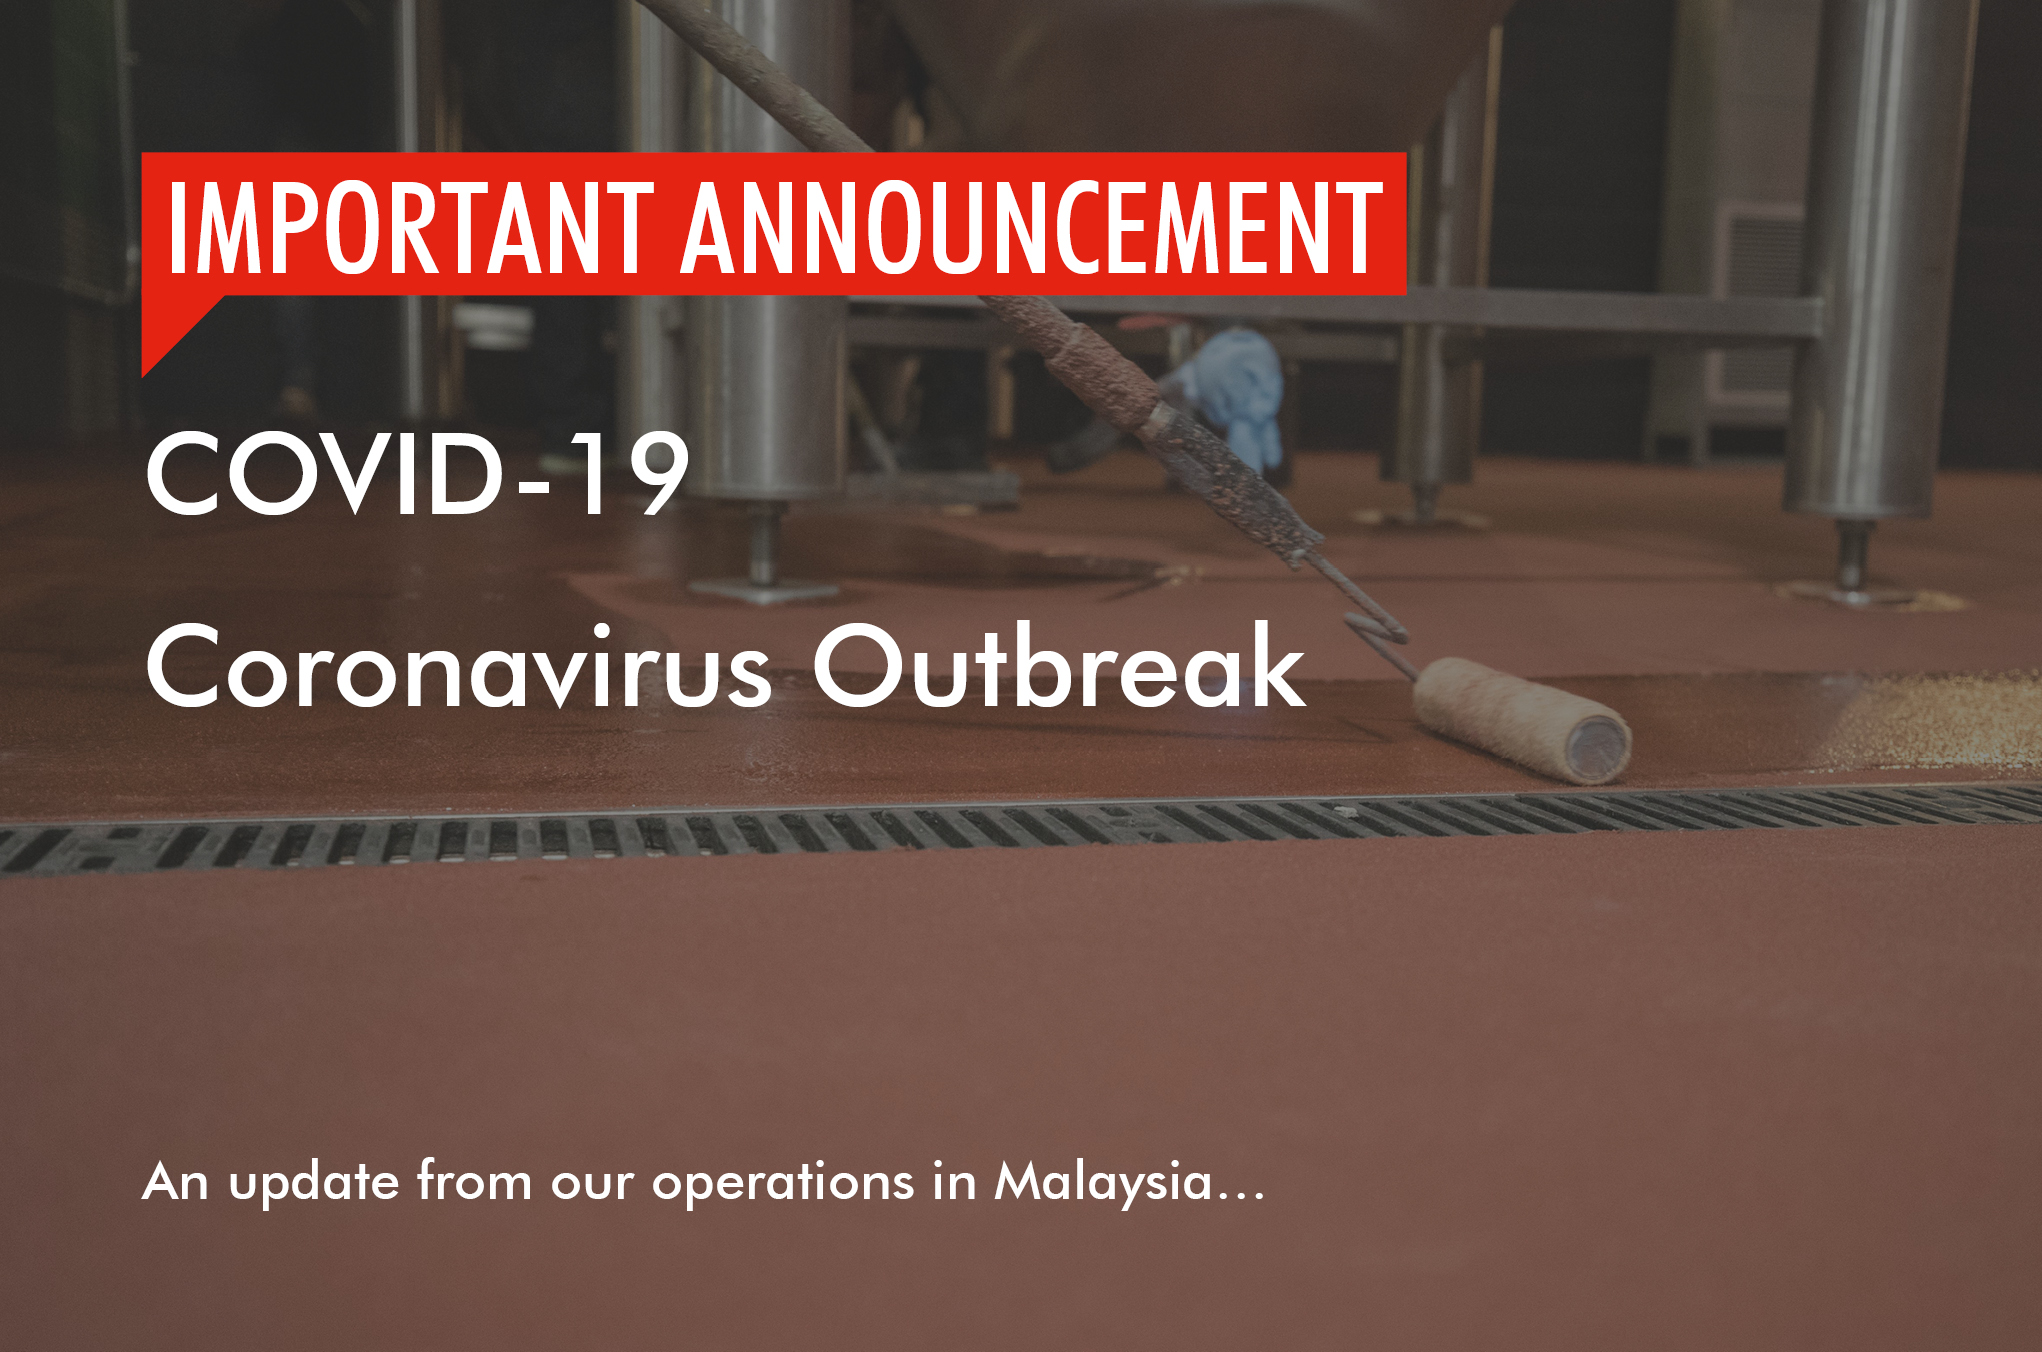 COVID 19 announcement for Malaysia plant operations